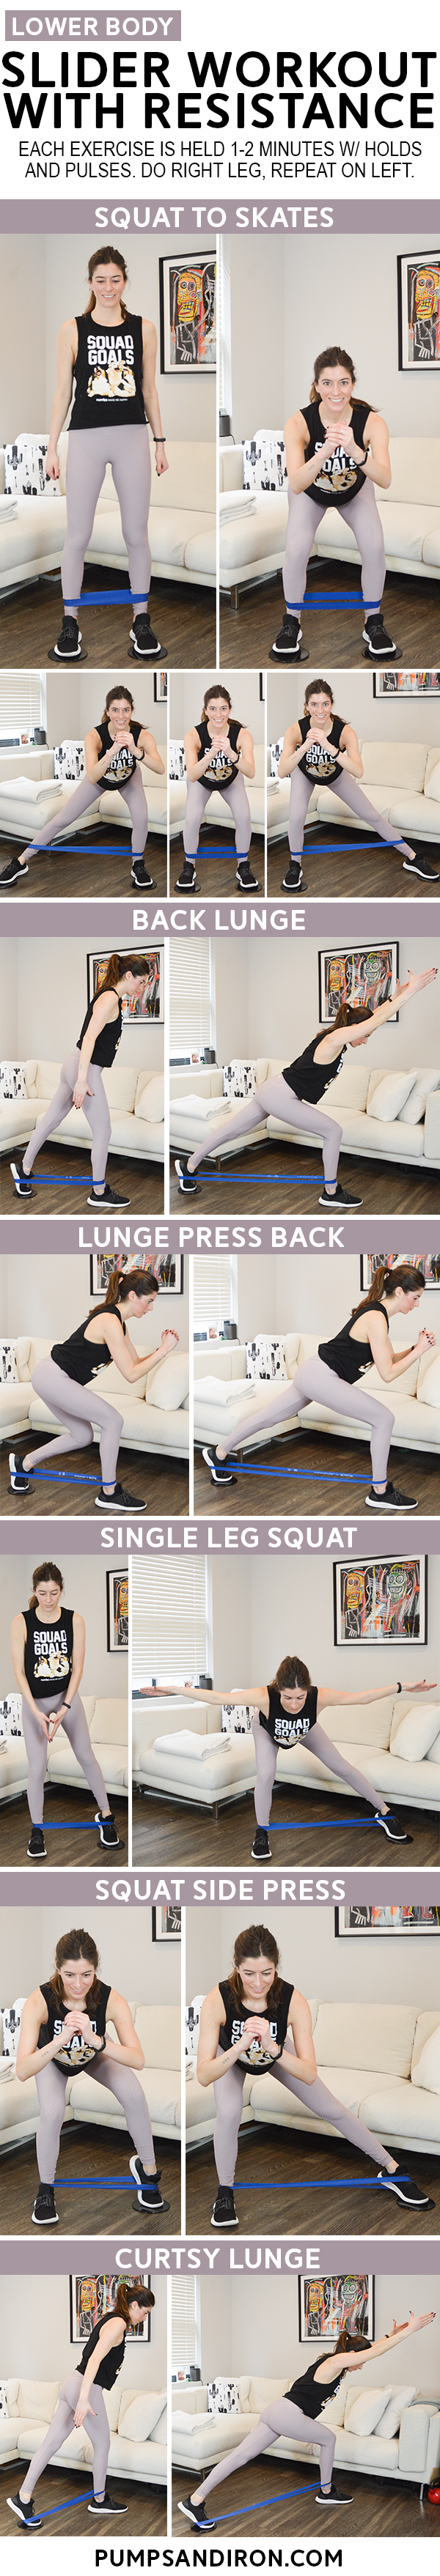 Lower Body Slider Workout with Resistance Bands - This low-impact workouts packs a major burn! You'll need sliders and a resistance band loop. Video included so you can follow along at home! pumpsandiron.com #workout #fitness